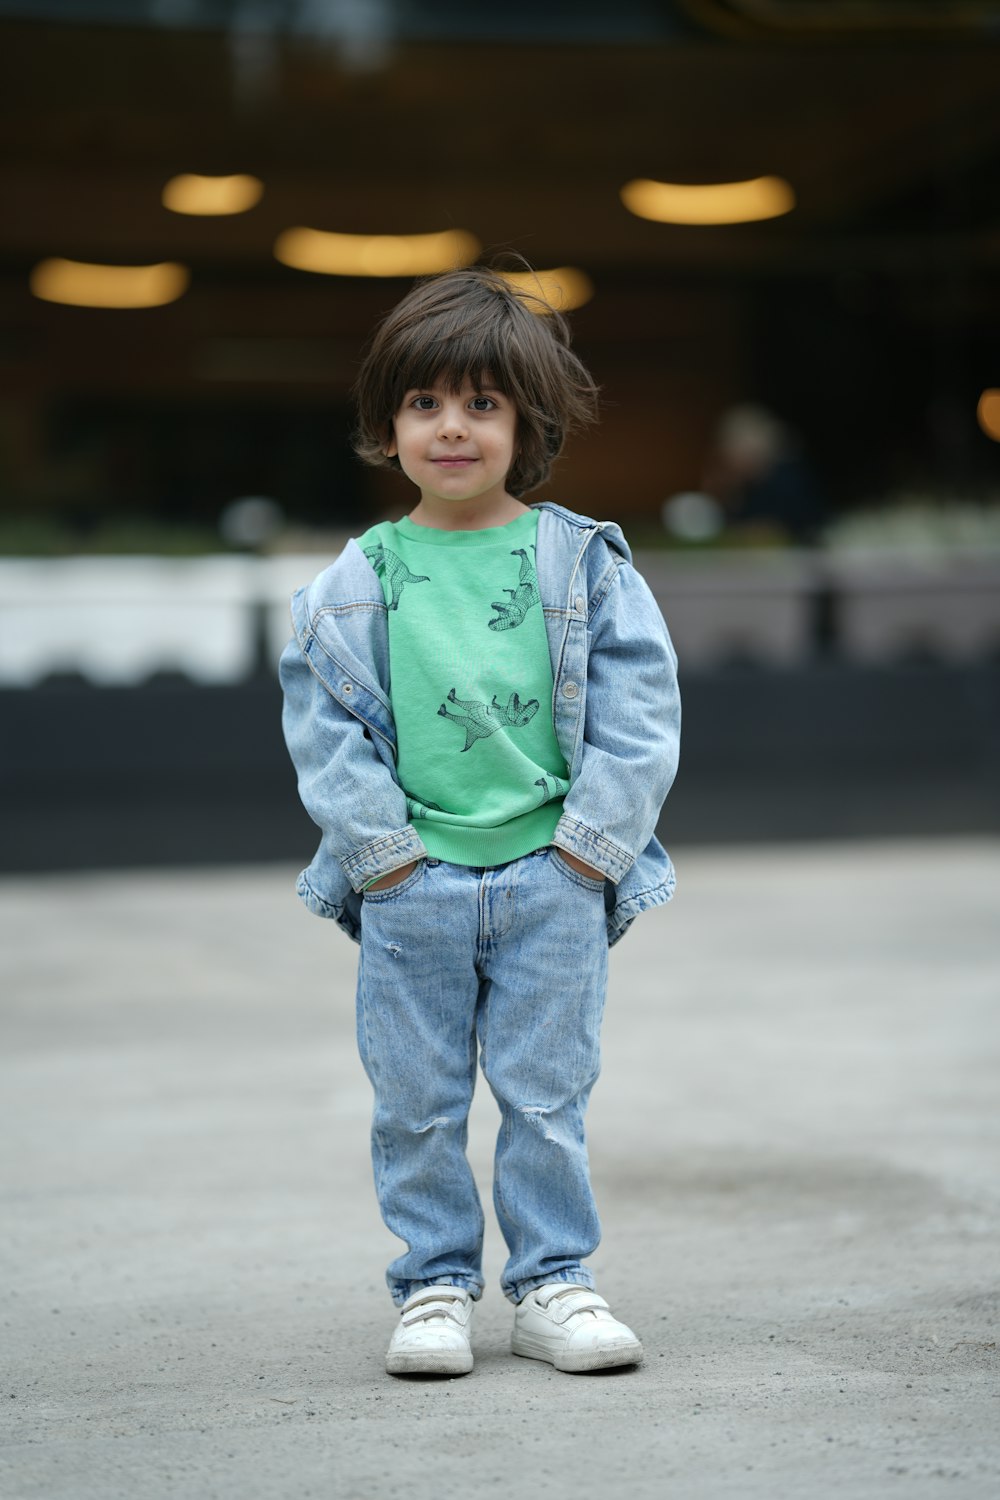 a young boy standing in a parking lot